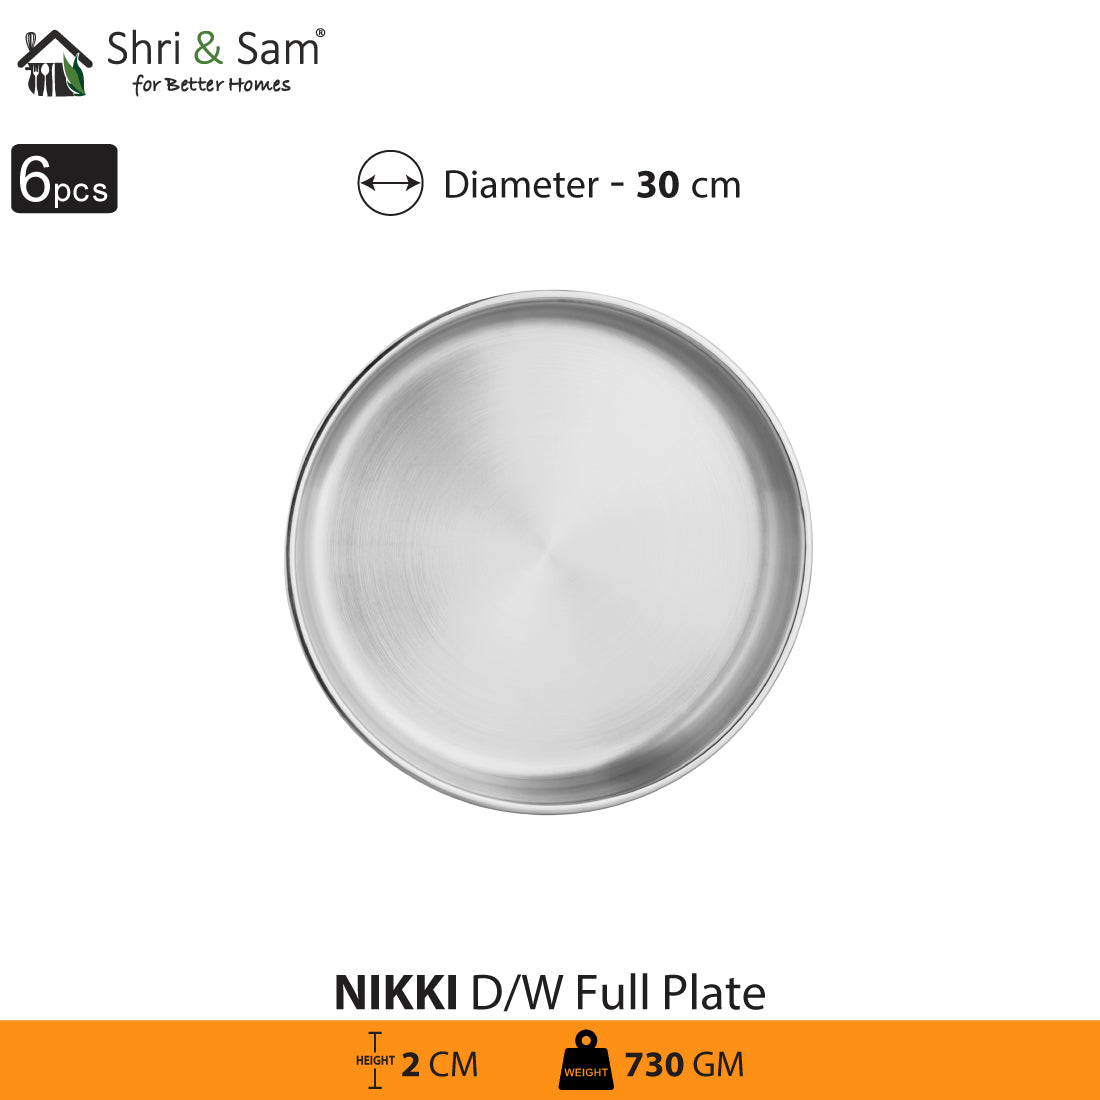 Stainless Steel 6 PCS Double Wall Full Plate Nikki